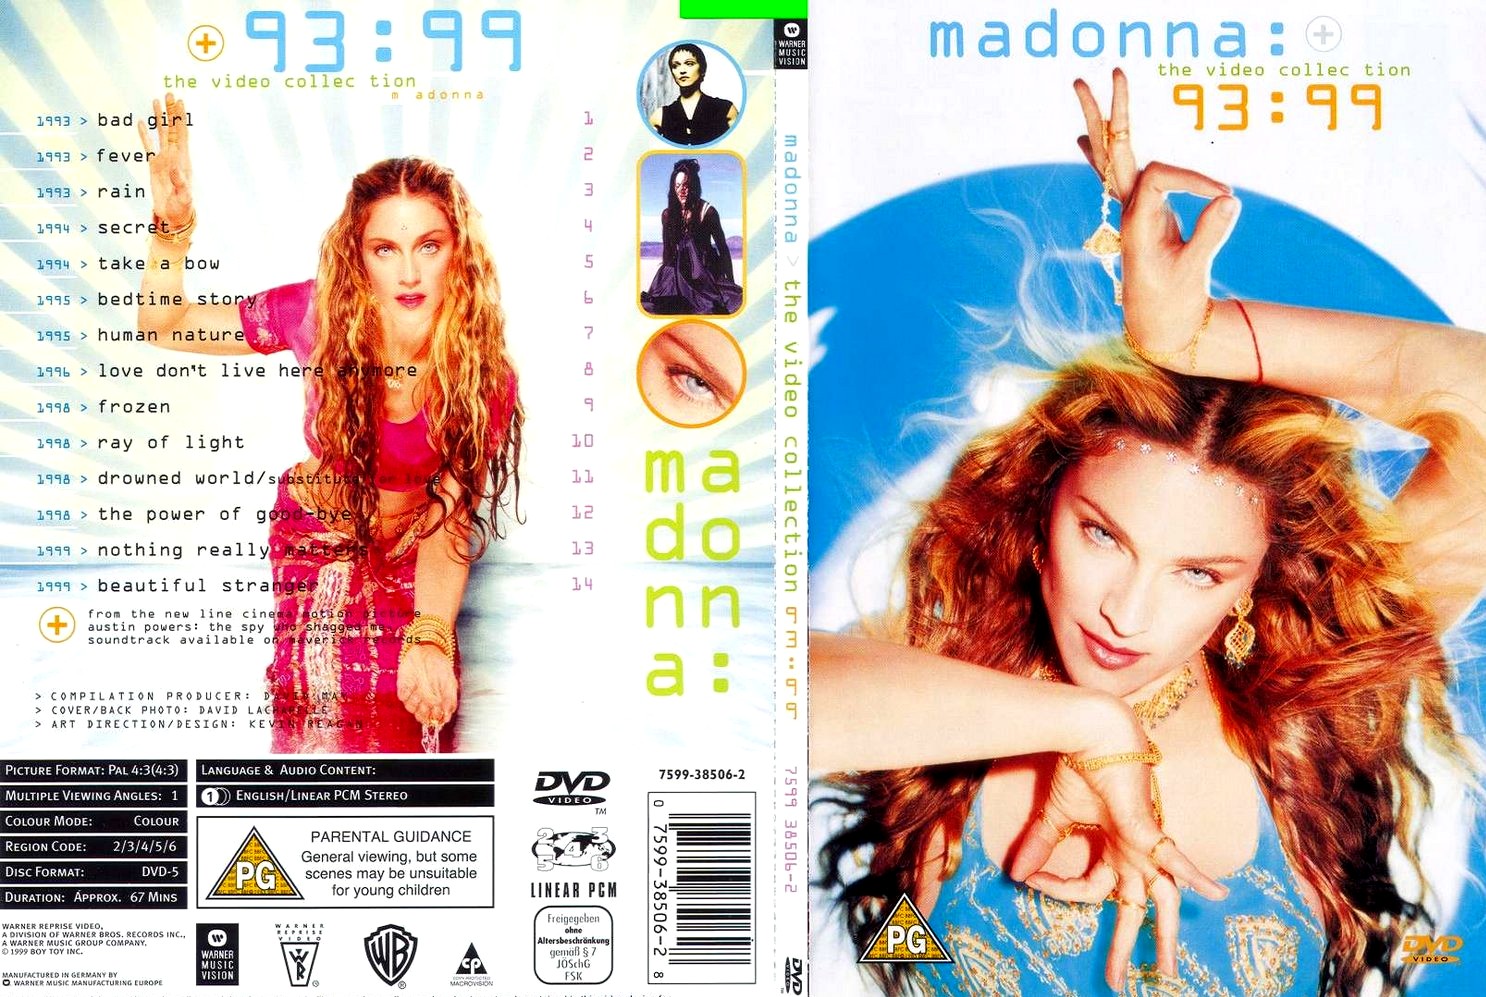 Image result for madonna The Video Collection